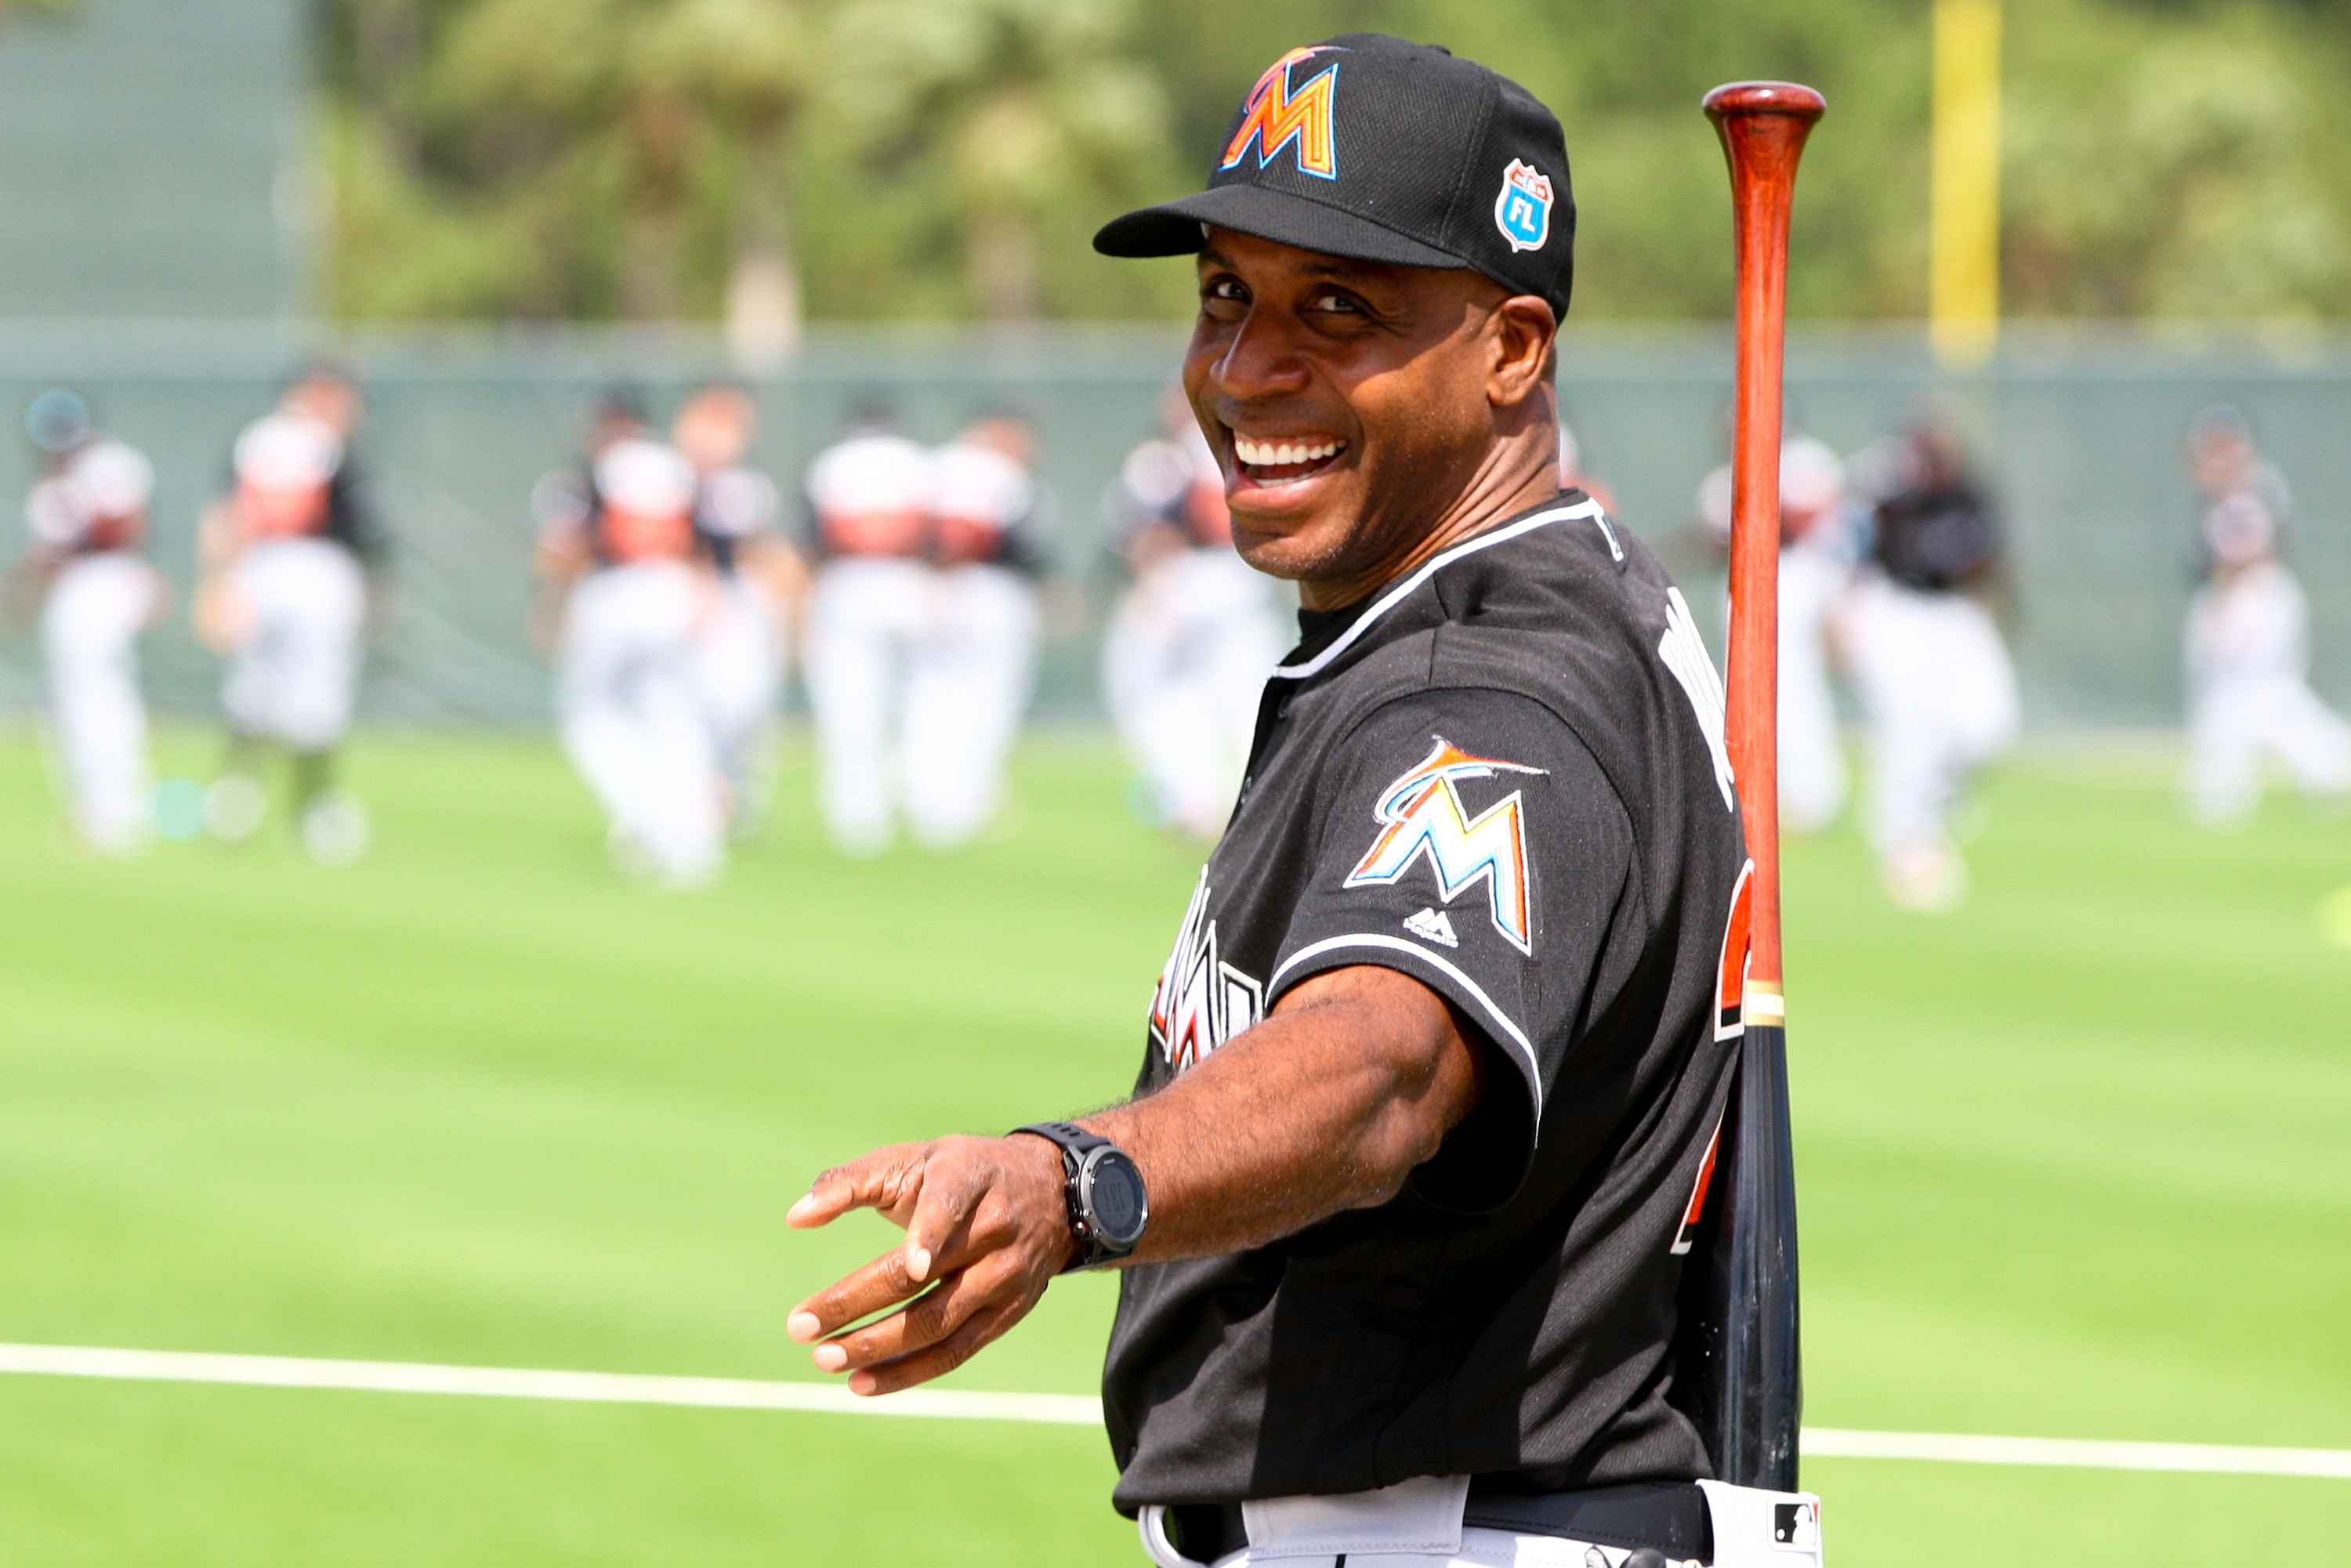 MLB notes: Marlins likely to fire hitting coach Barry Bonds - The